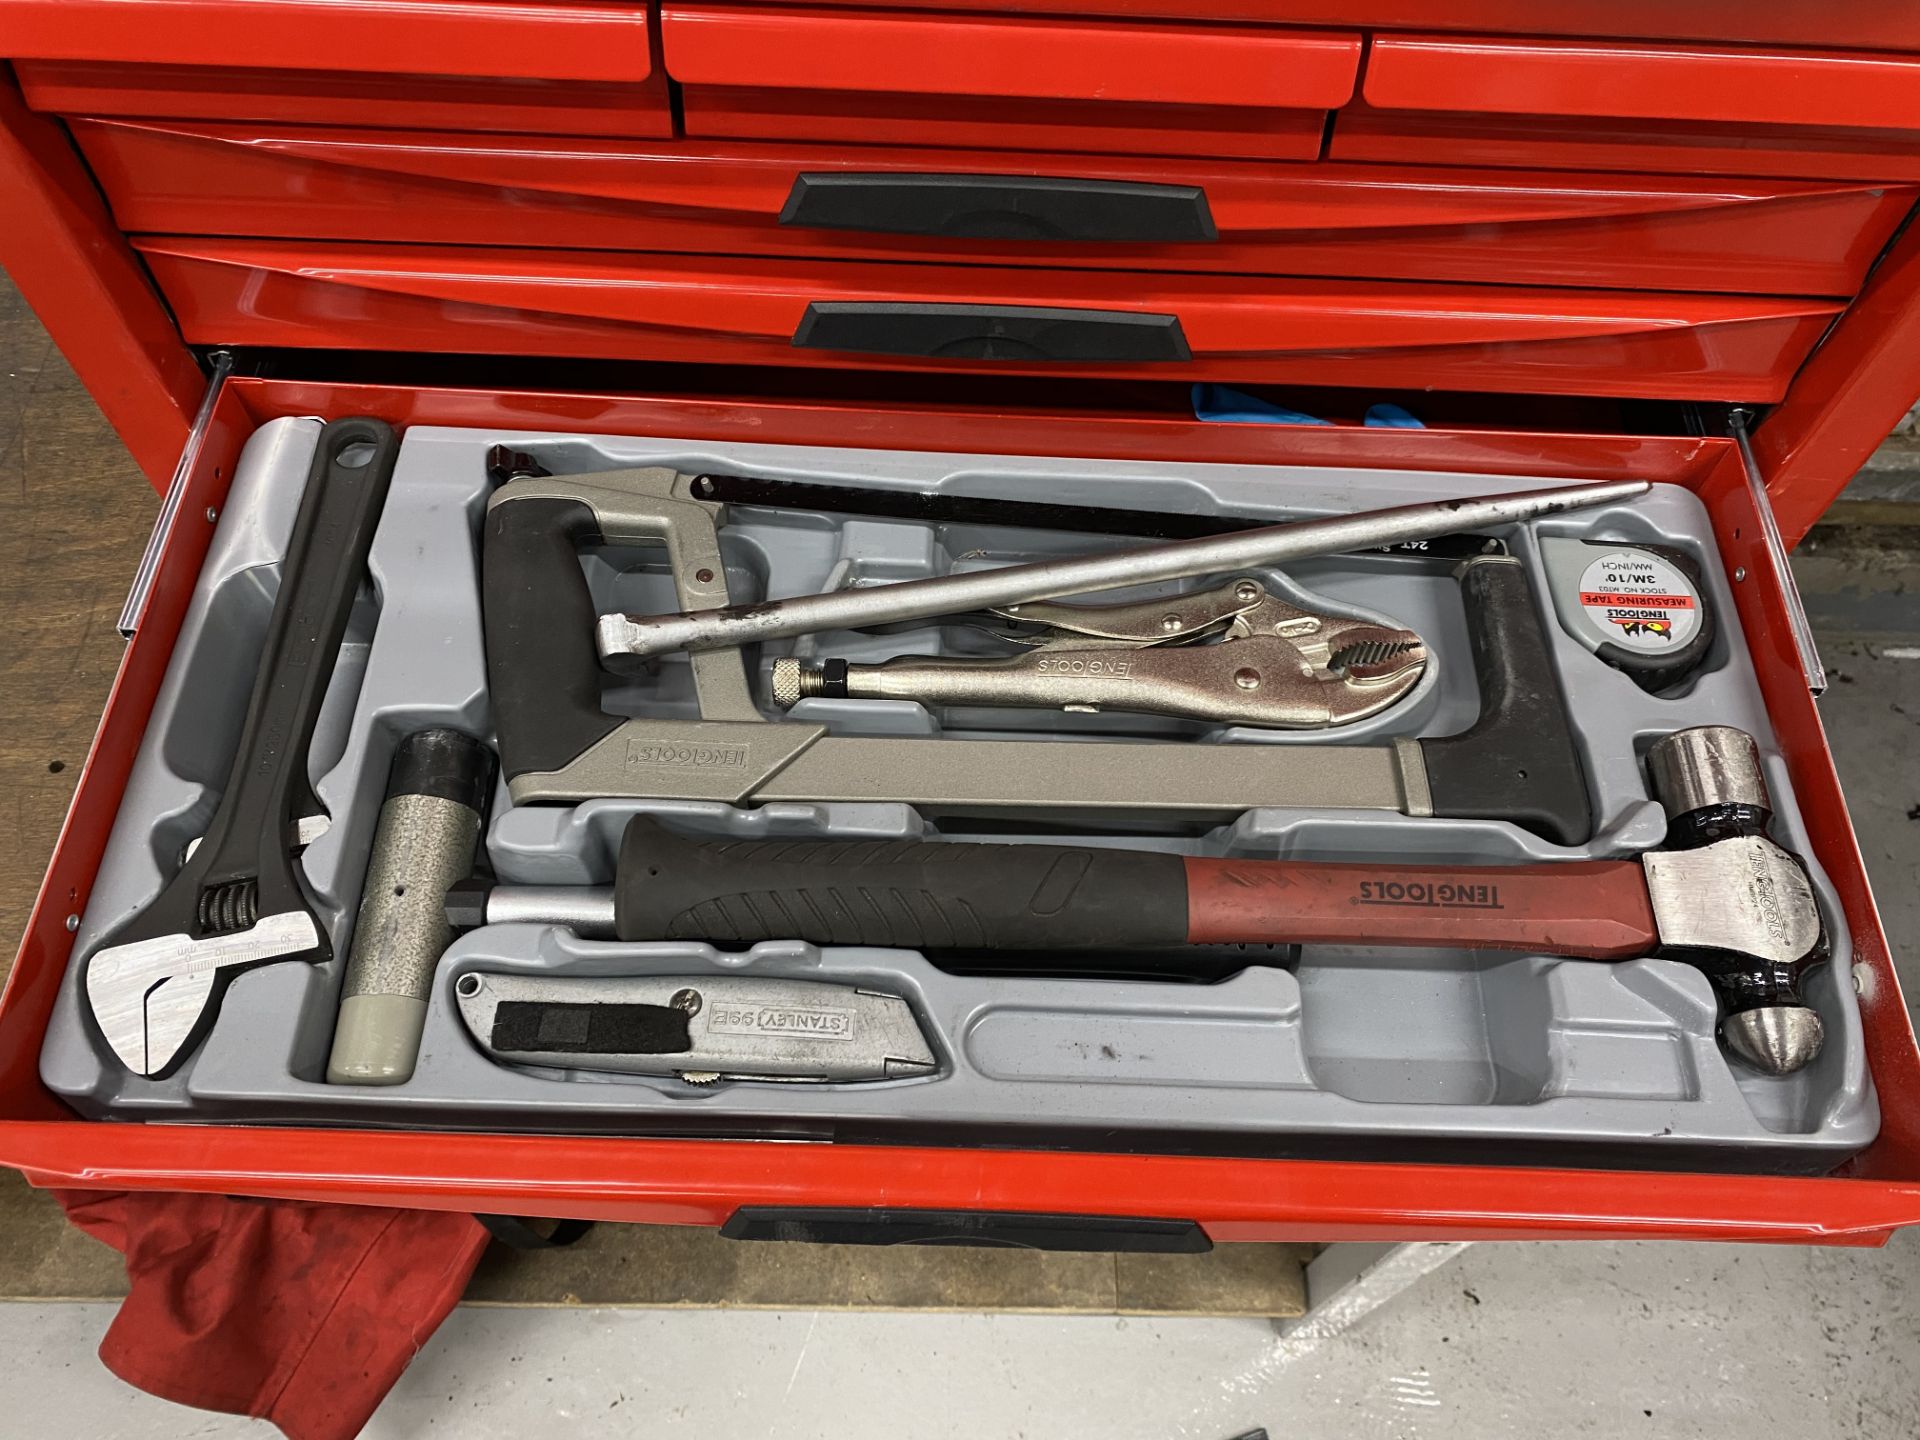 Tengtools TMO35NF 6 drawer toolbox including the following tools, hammer, grips, adjustable spanner, - Image 5 of 5